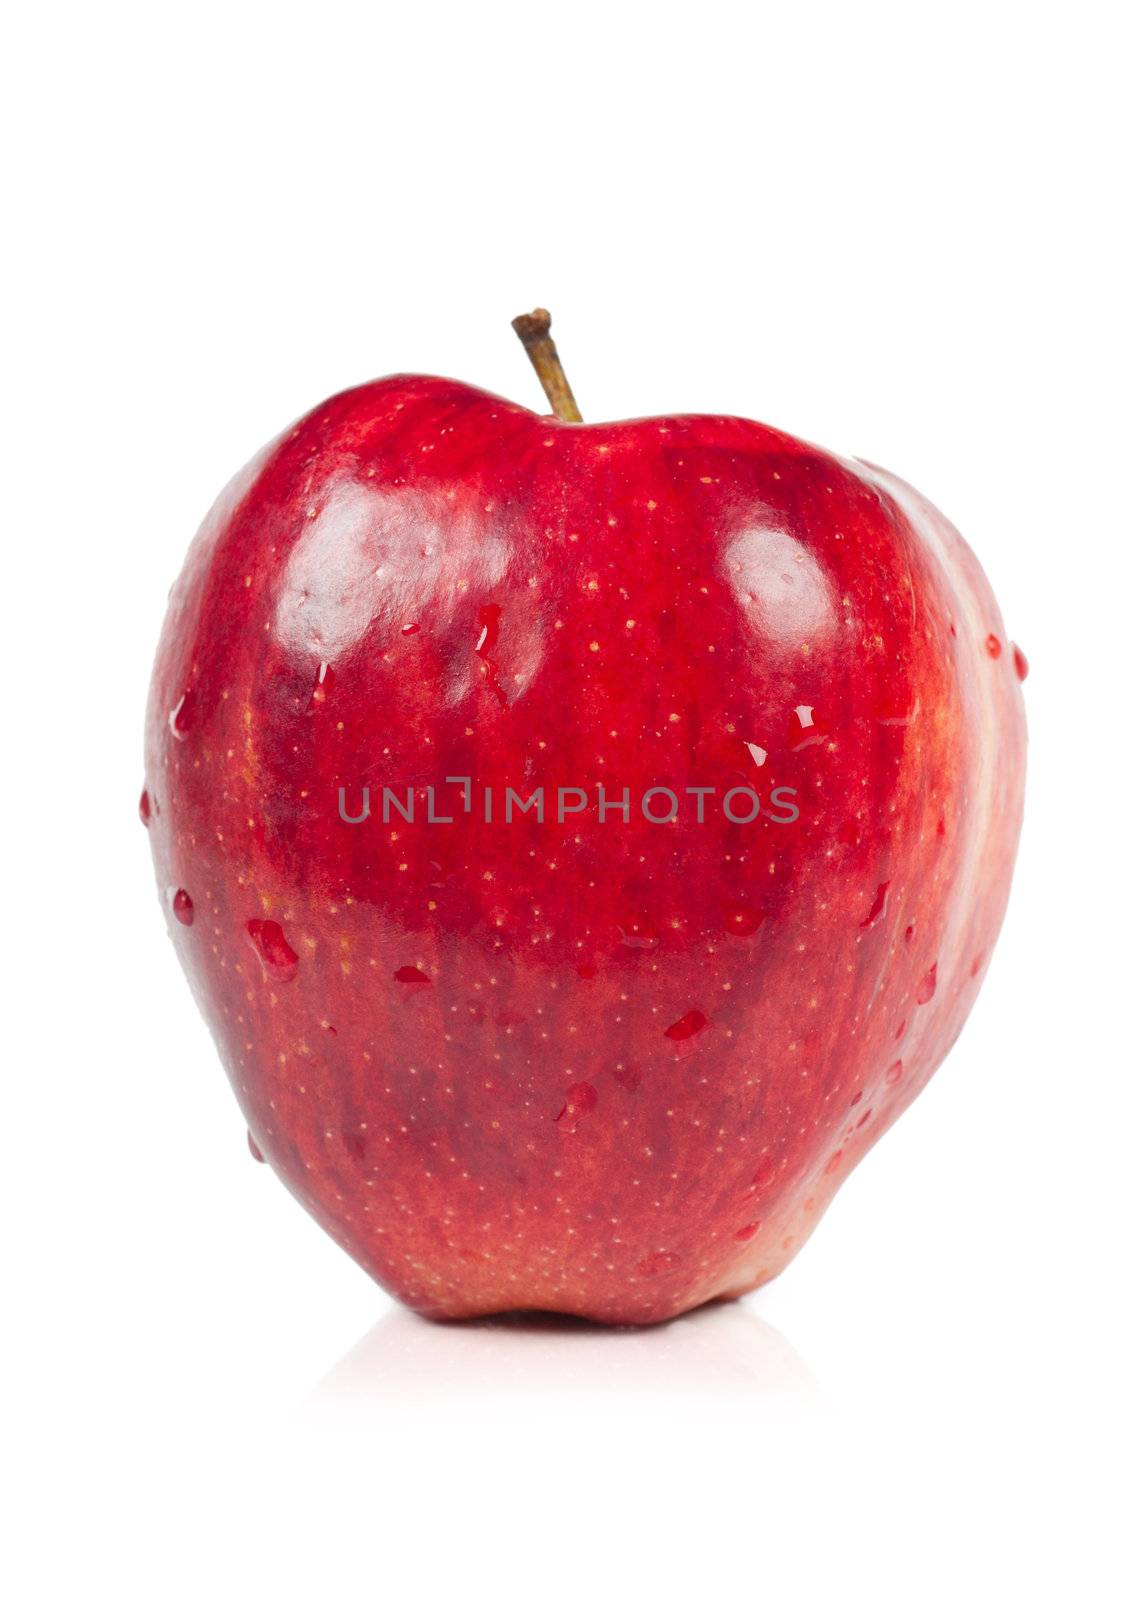 Big red apple isolated over white background